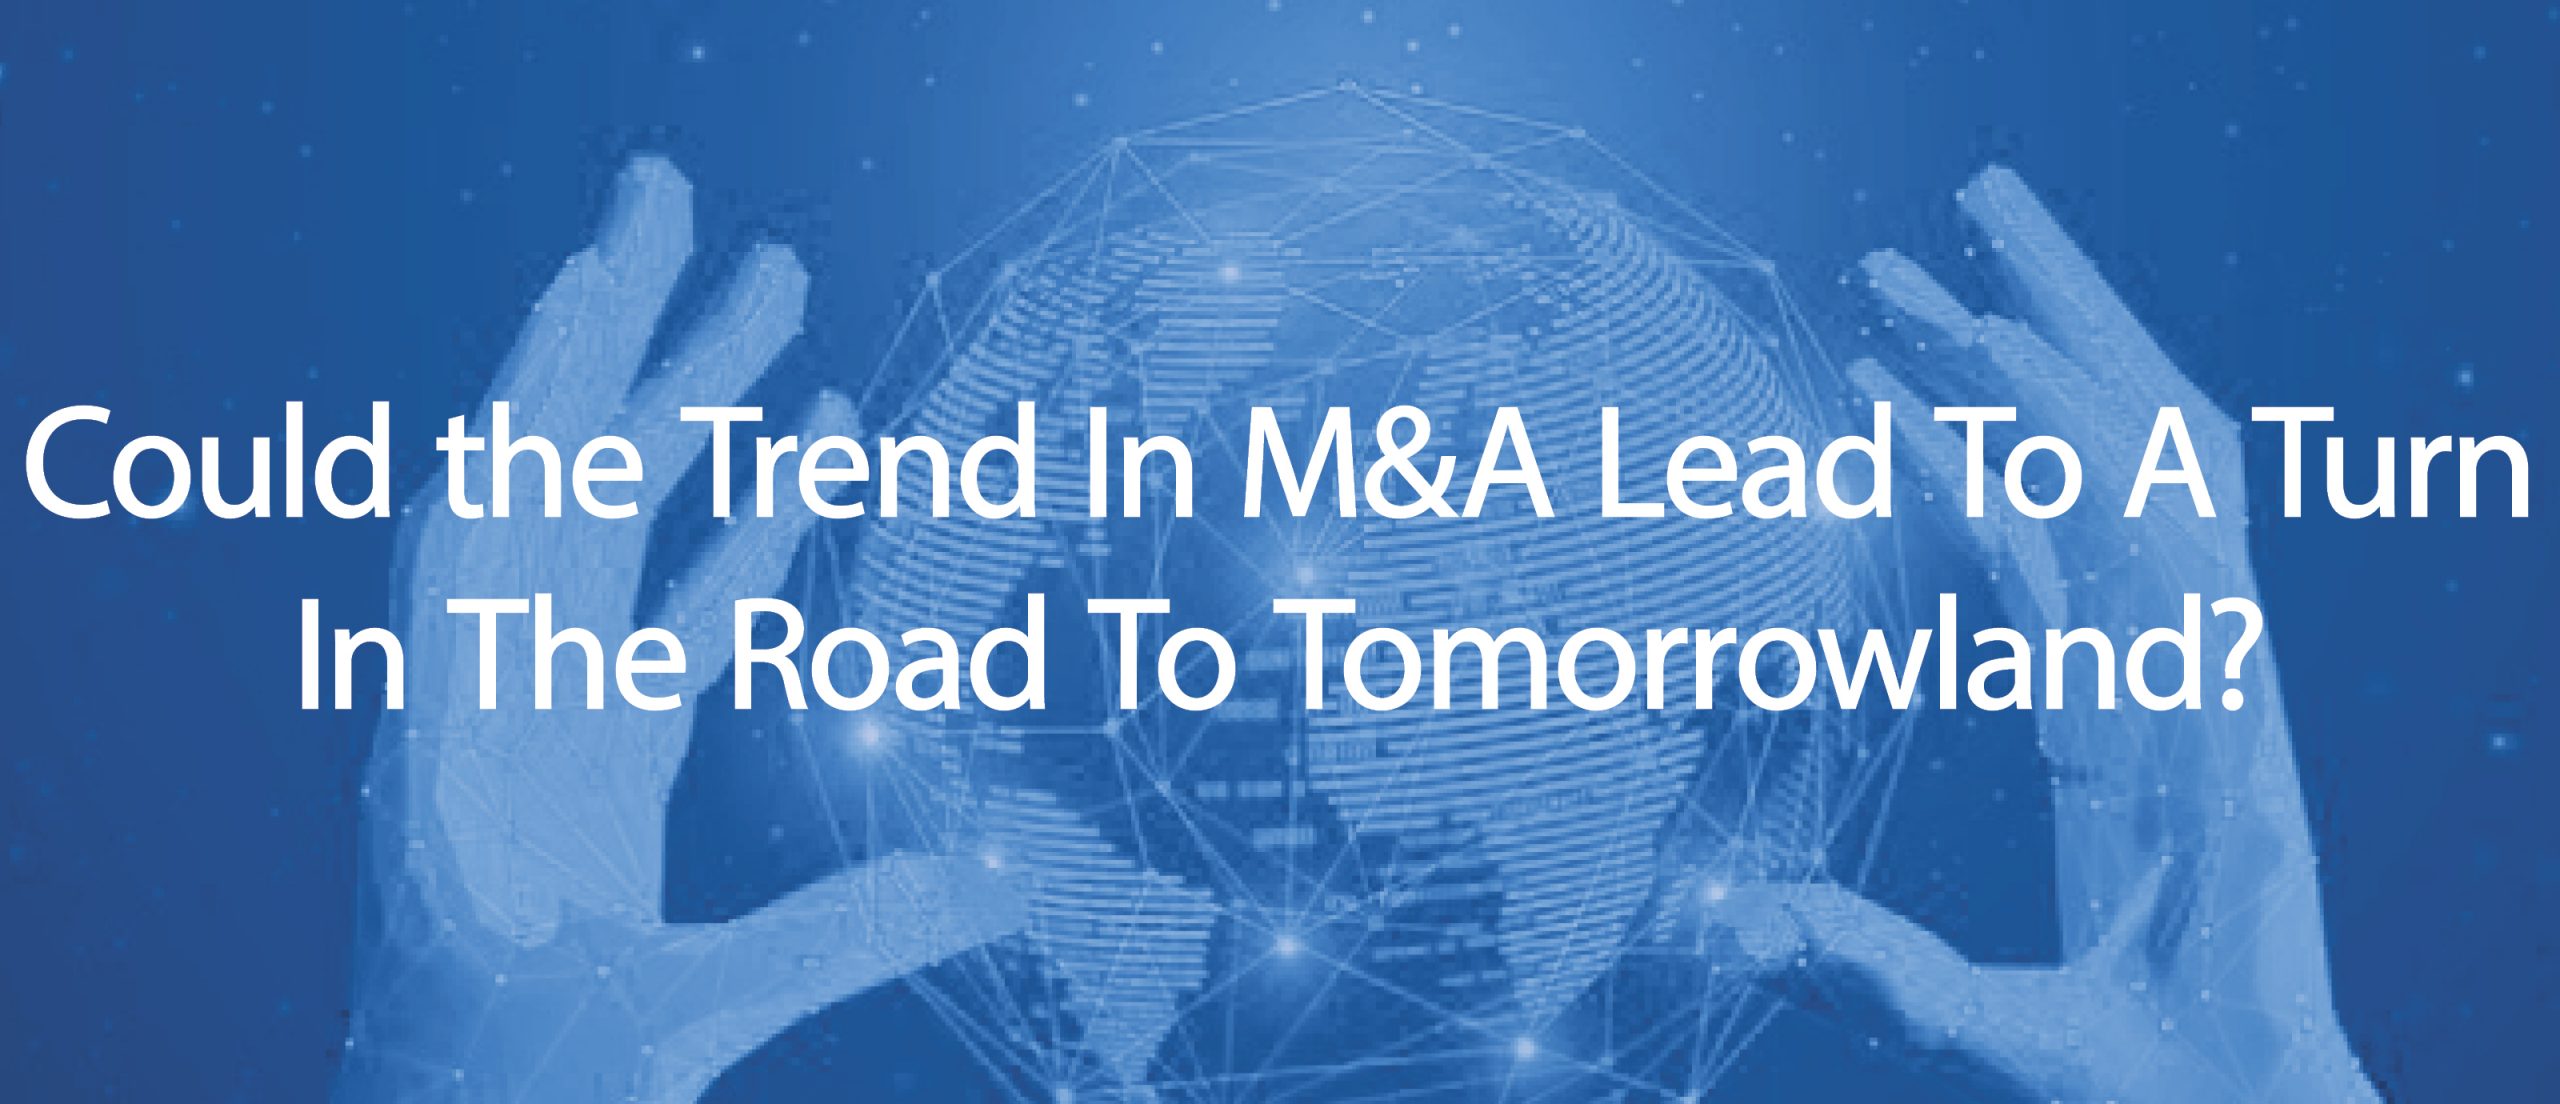 Blog title: Could the trend in M&A lead to a turn in the road to tomorrowland?